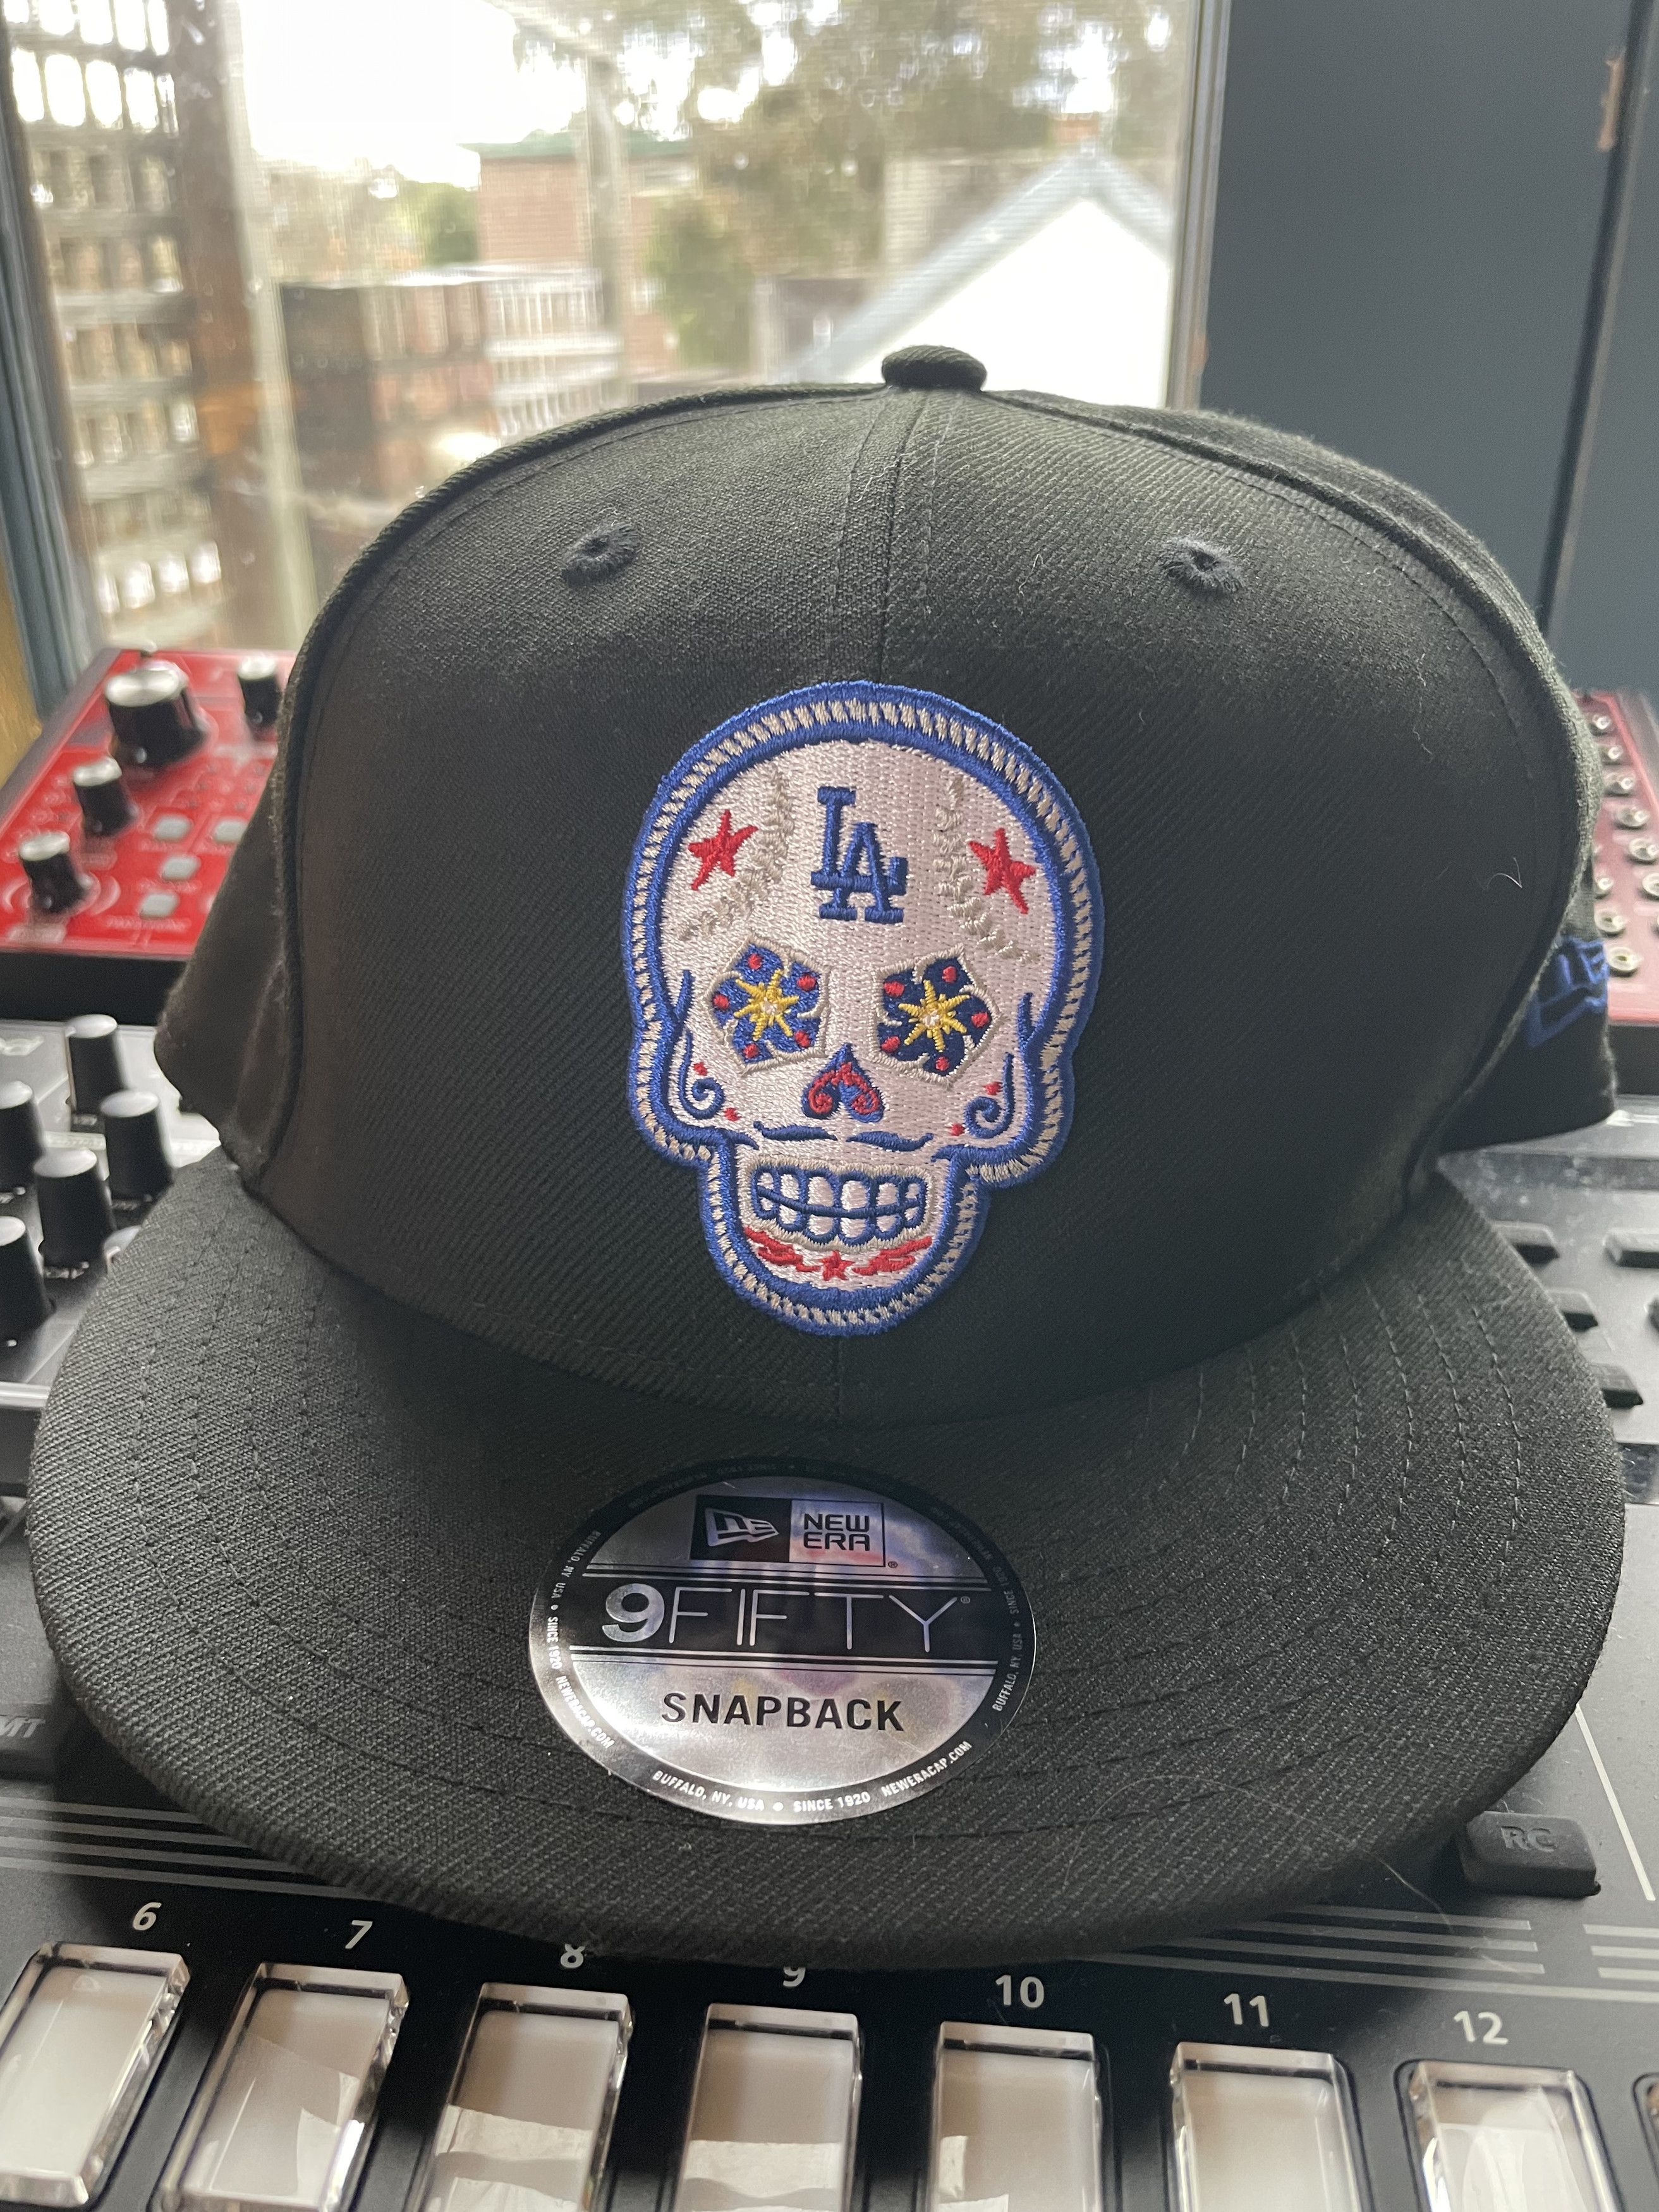 Day of The Dead Pink Sugar Skull 59FIFTY Fitted Hat, White - Size: 7, by New Era